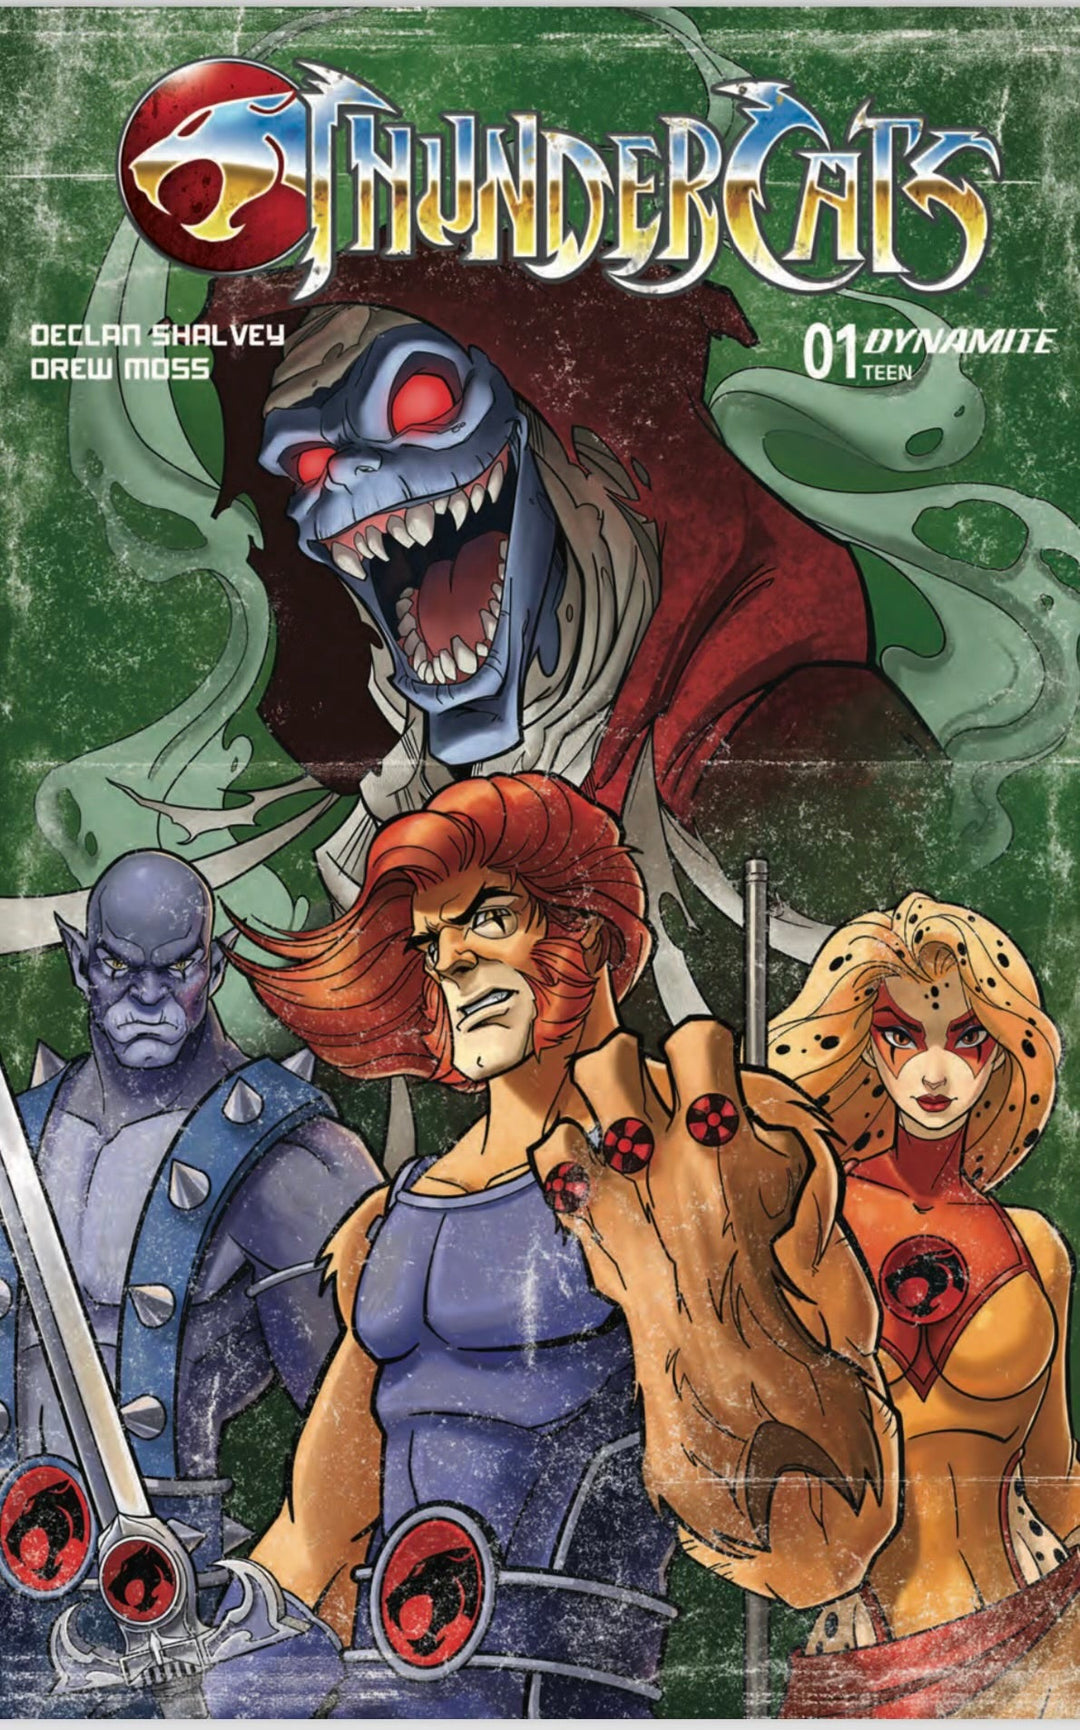 Thundercats #1 Gabe's Cave Exclusive Distressed Cover by Peter Smith - gabescaveccc